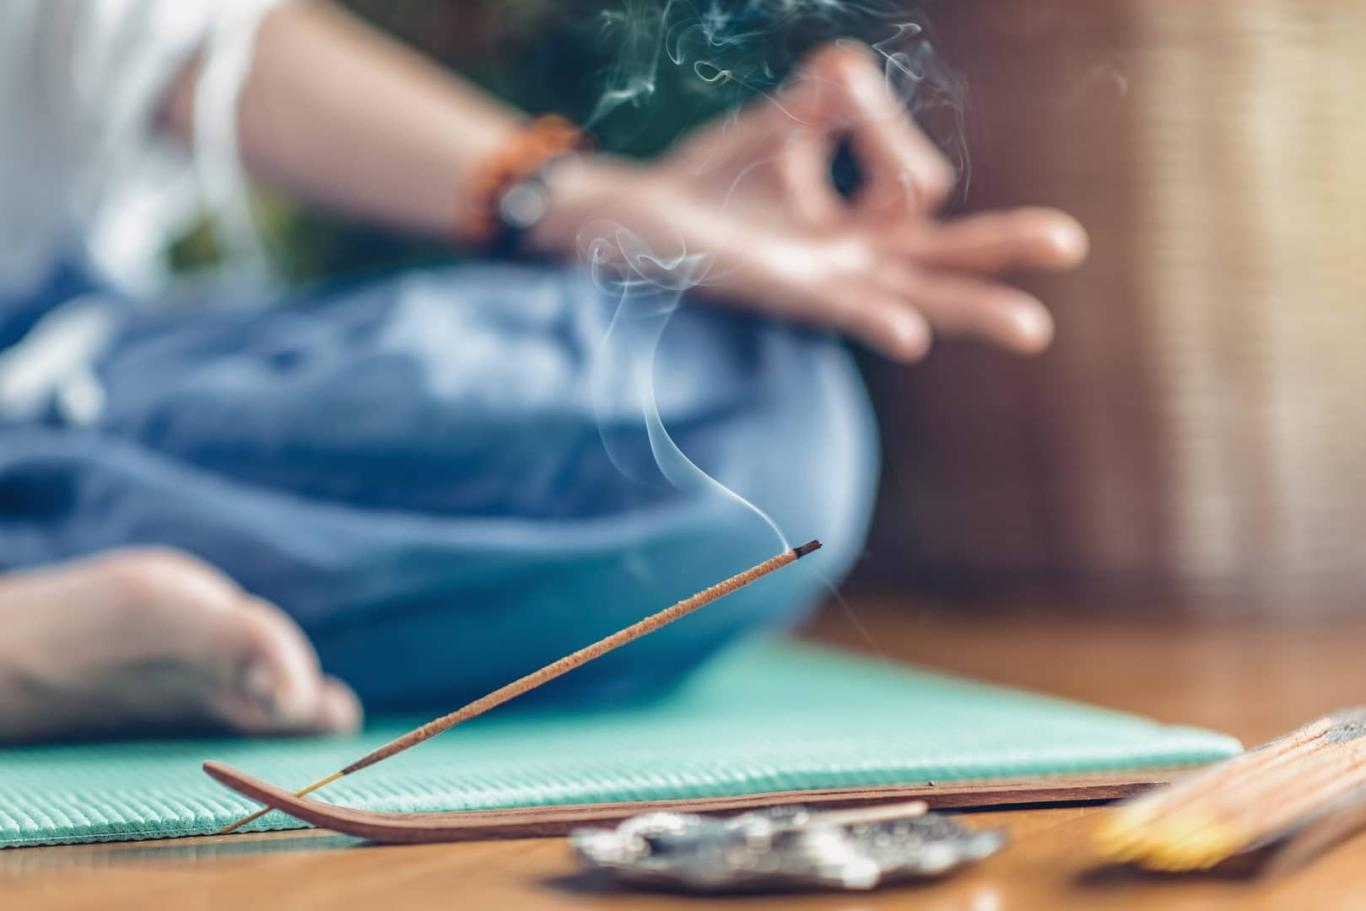 Woman meditating in lotus position on turquoise yoga mat on wooden floor. Focus on incense stick and smoke. Unrecognizable yoga practitioner in the background. Relax after Yoga training.